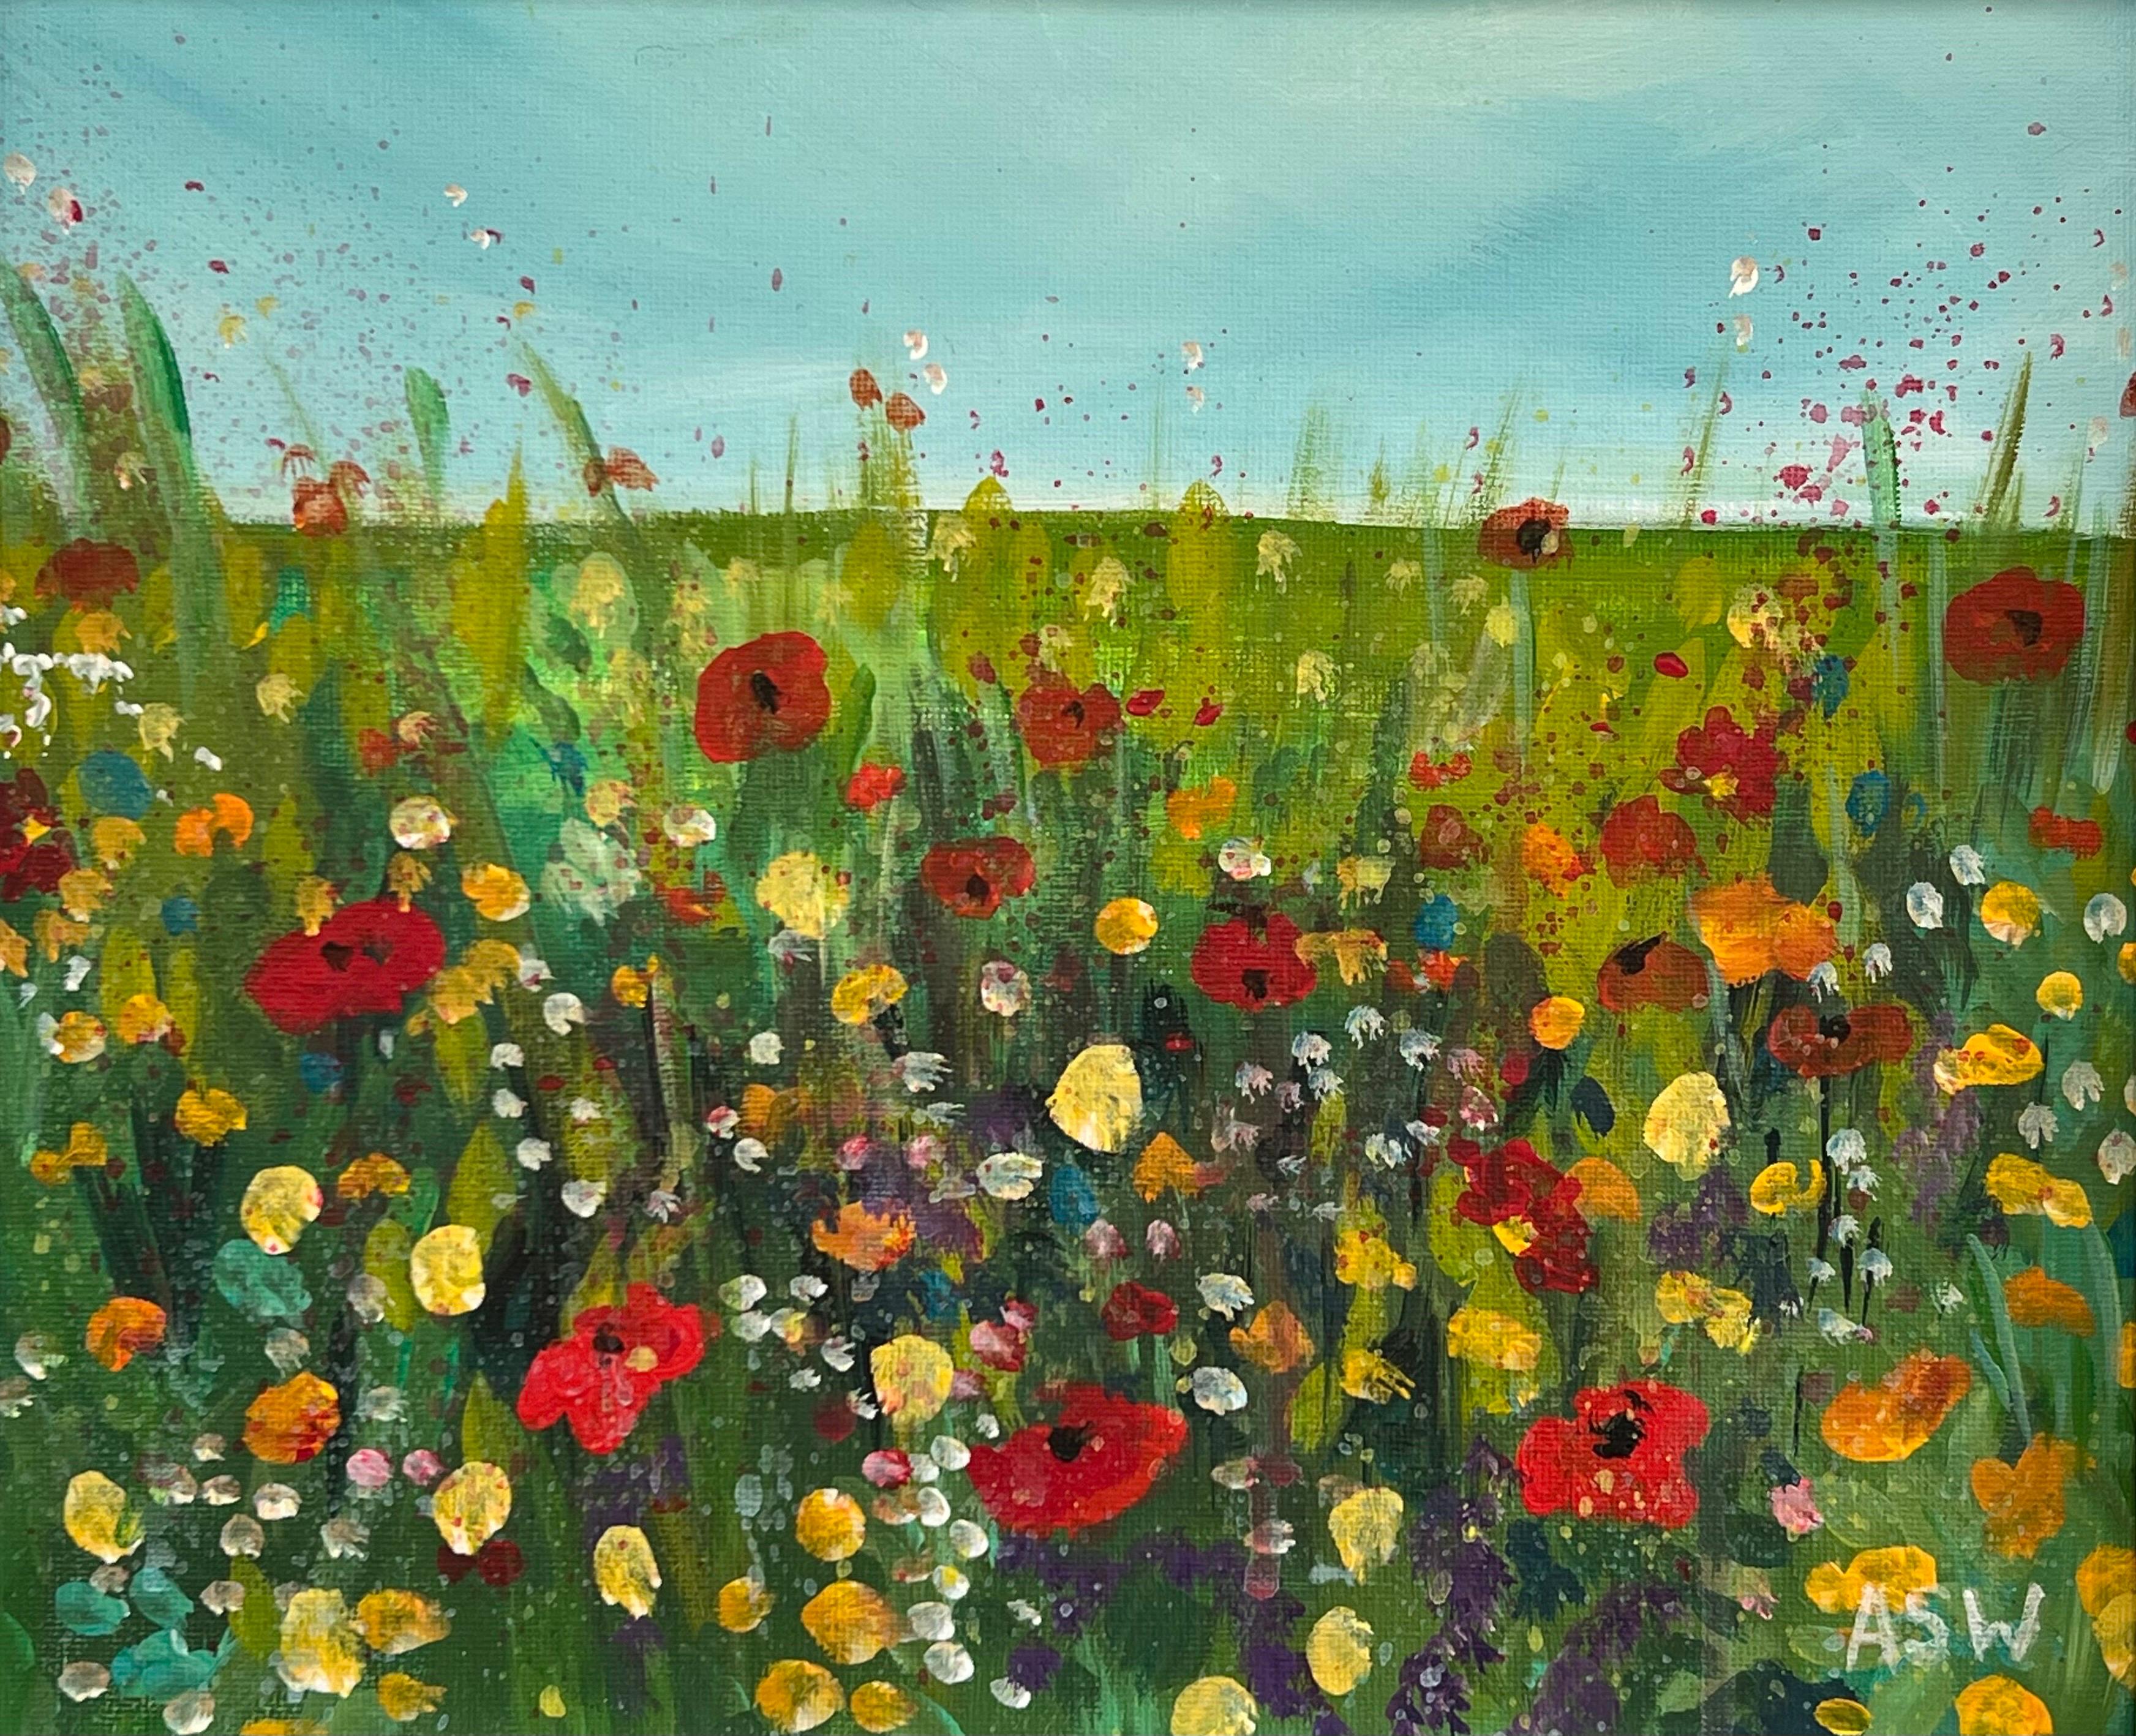 Colourful Wild Red & Yellow Flowers in a Meadow Landscape by Contemporary Artist - Painting by Angela Wakefield